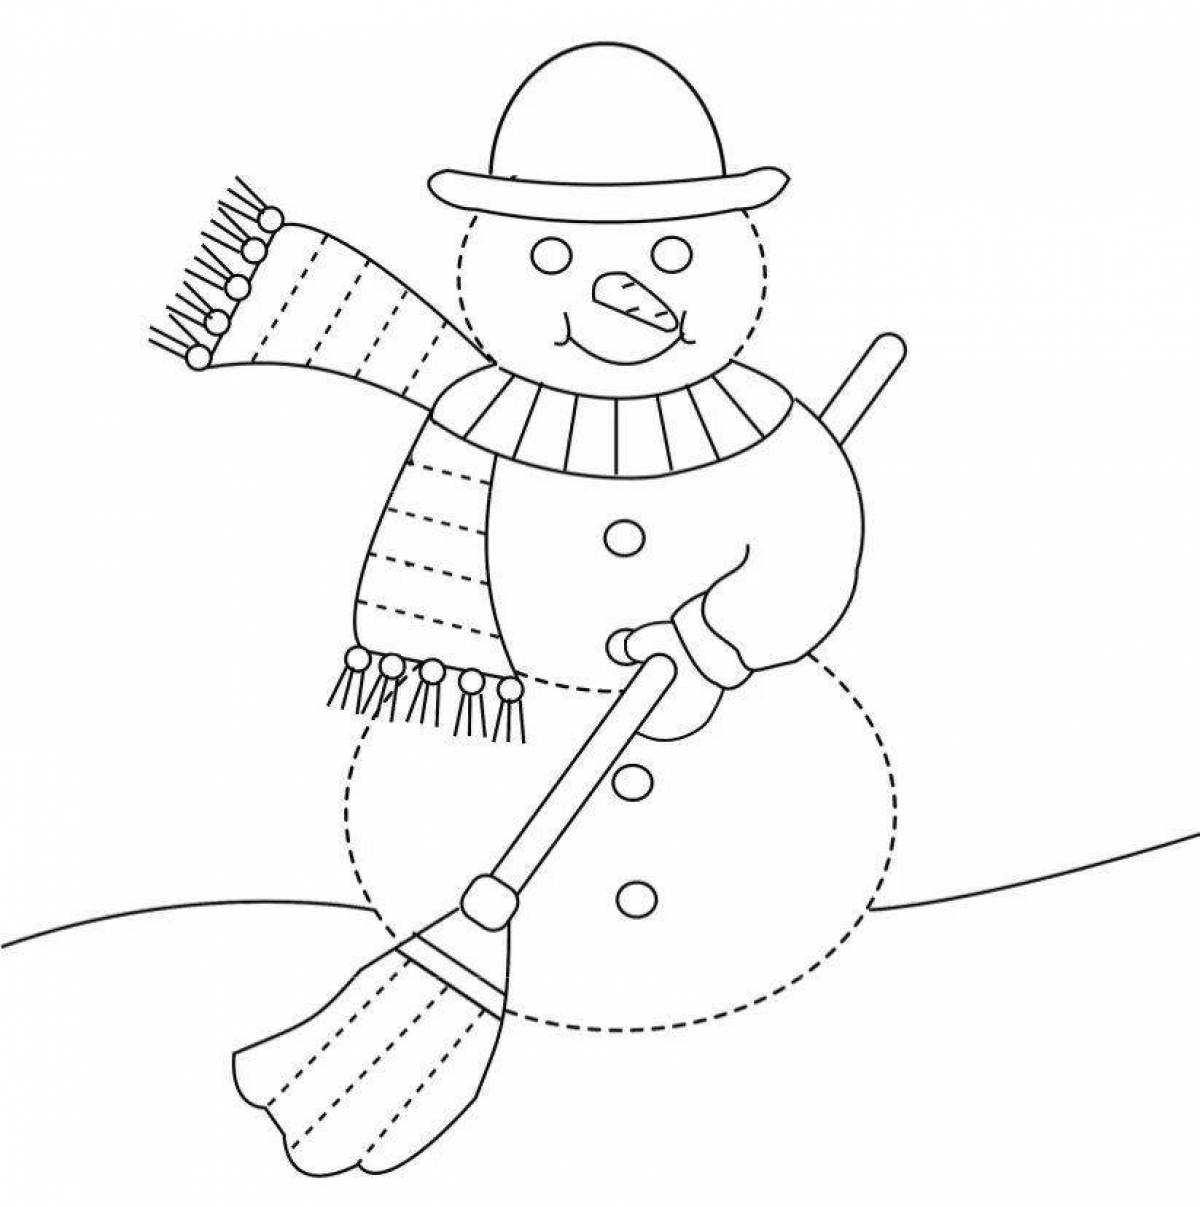 Sparkling snowman coloring by numbers